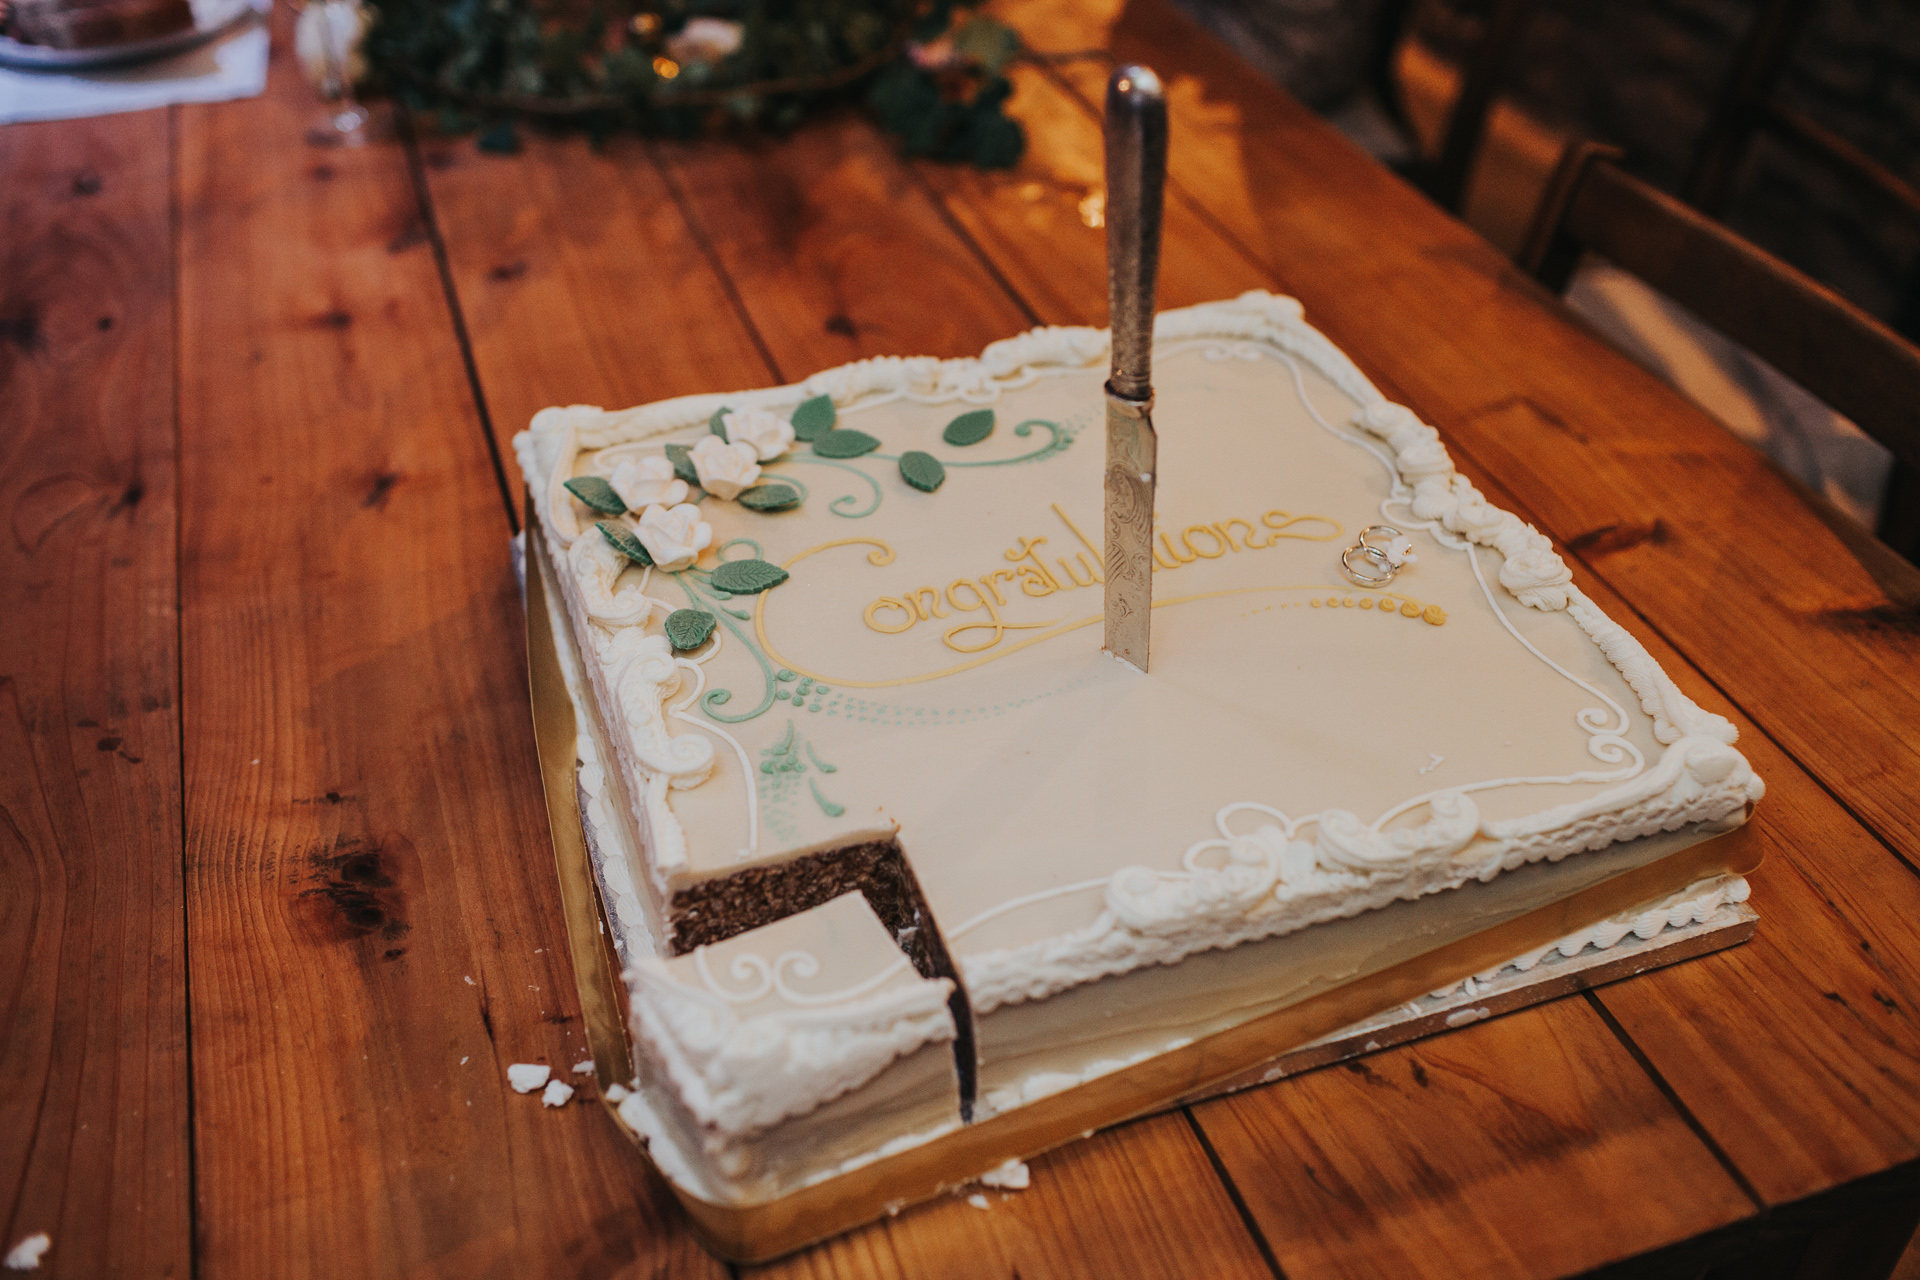 Knife sticking out of cake. 